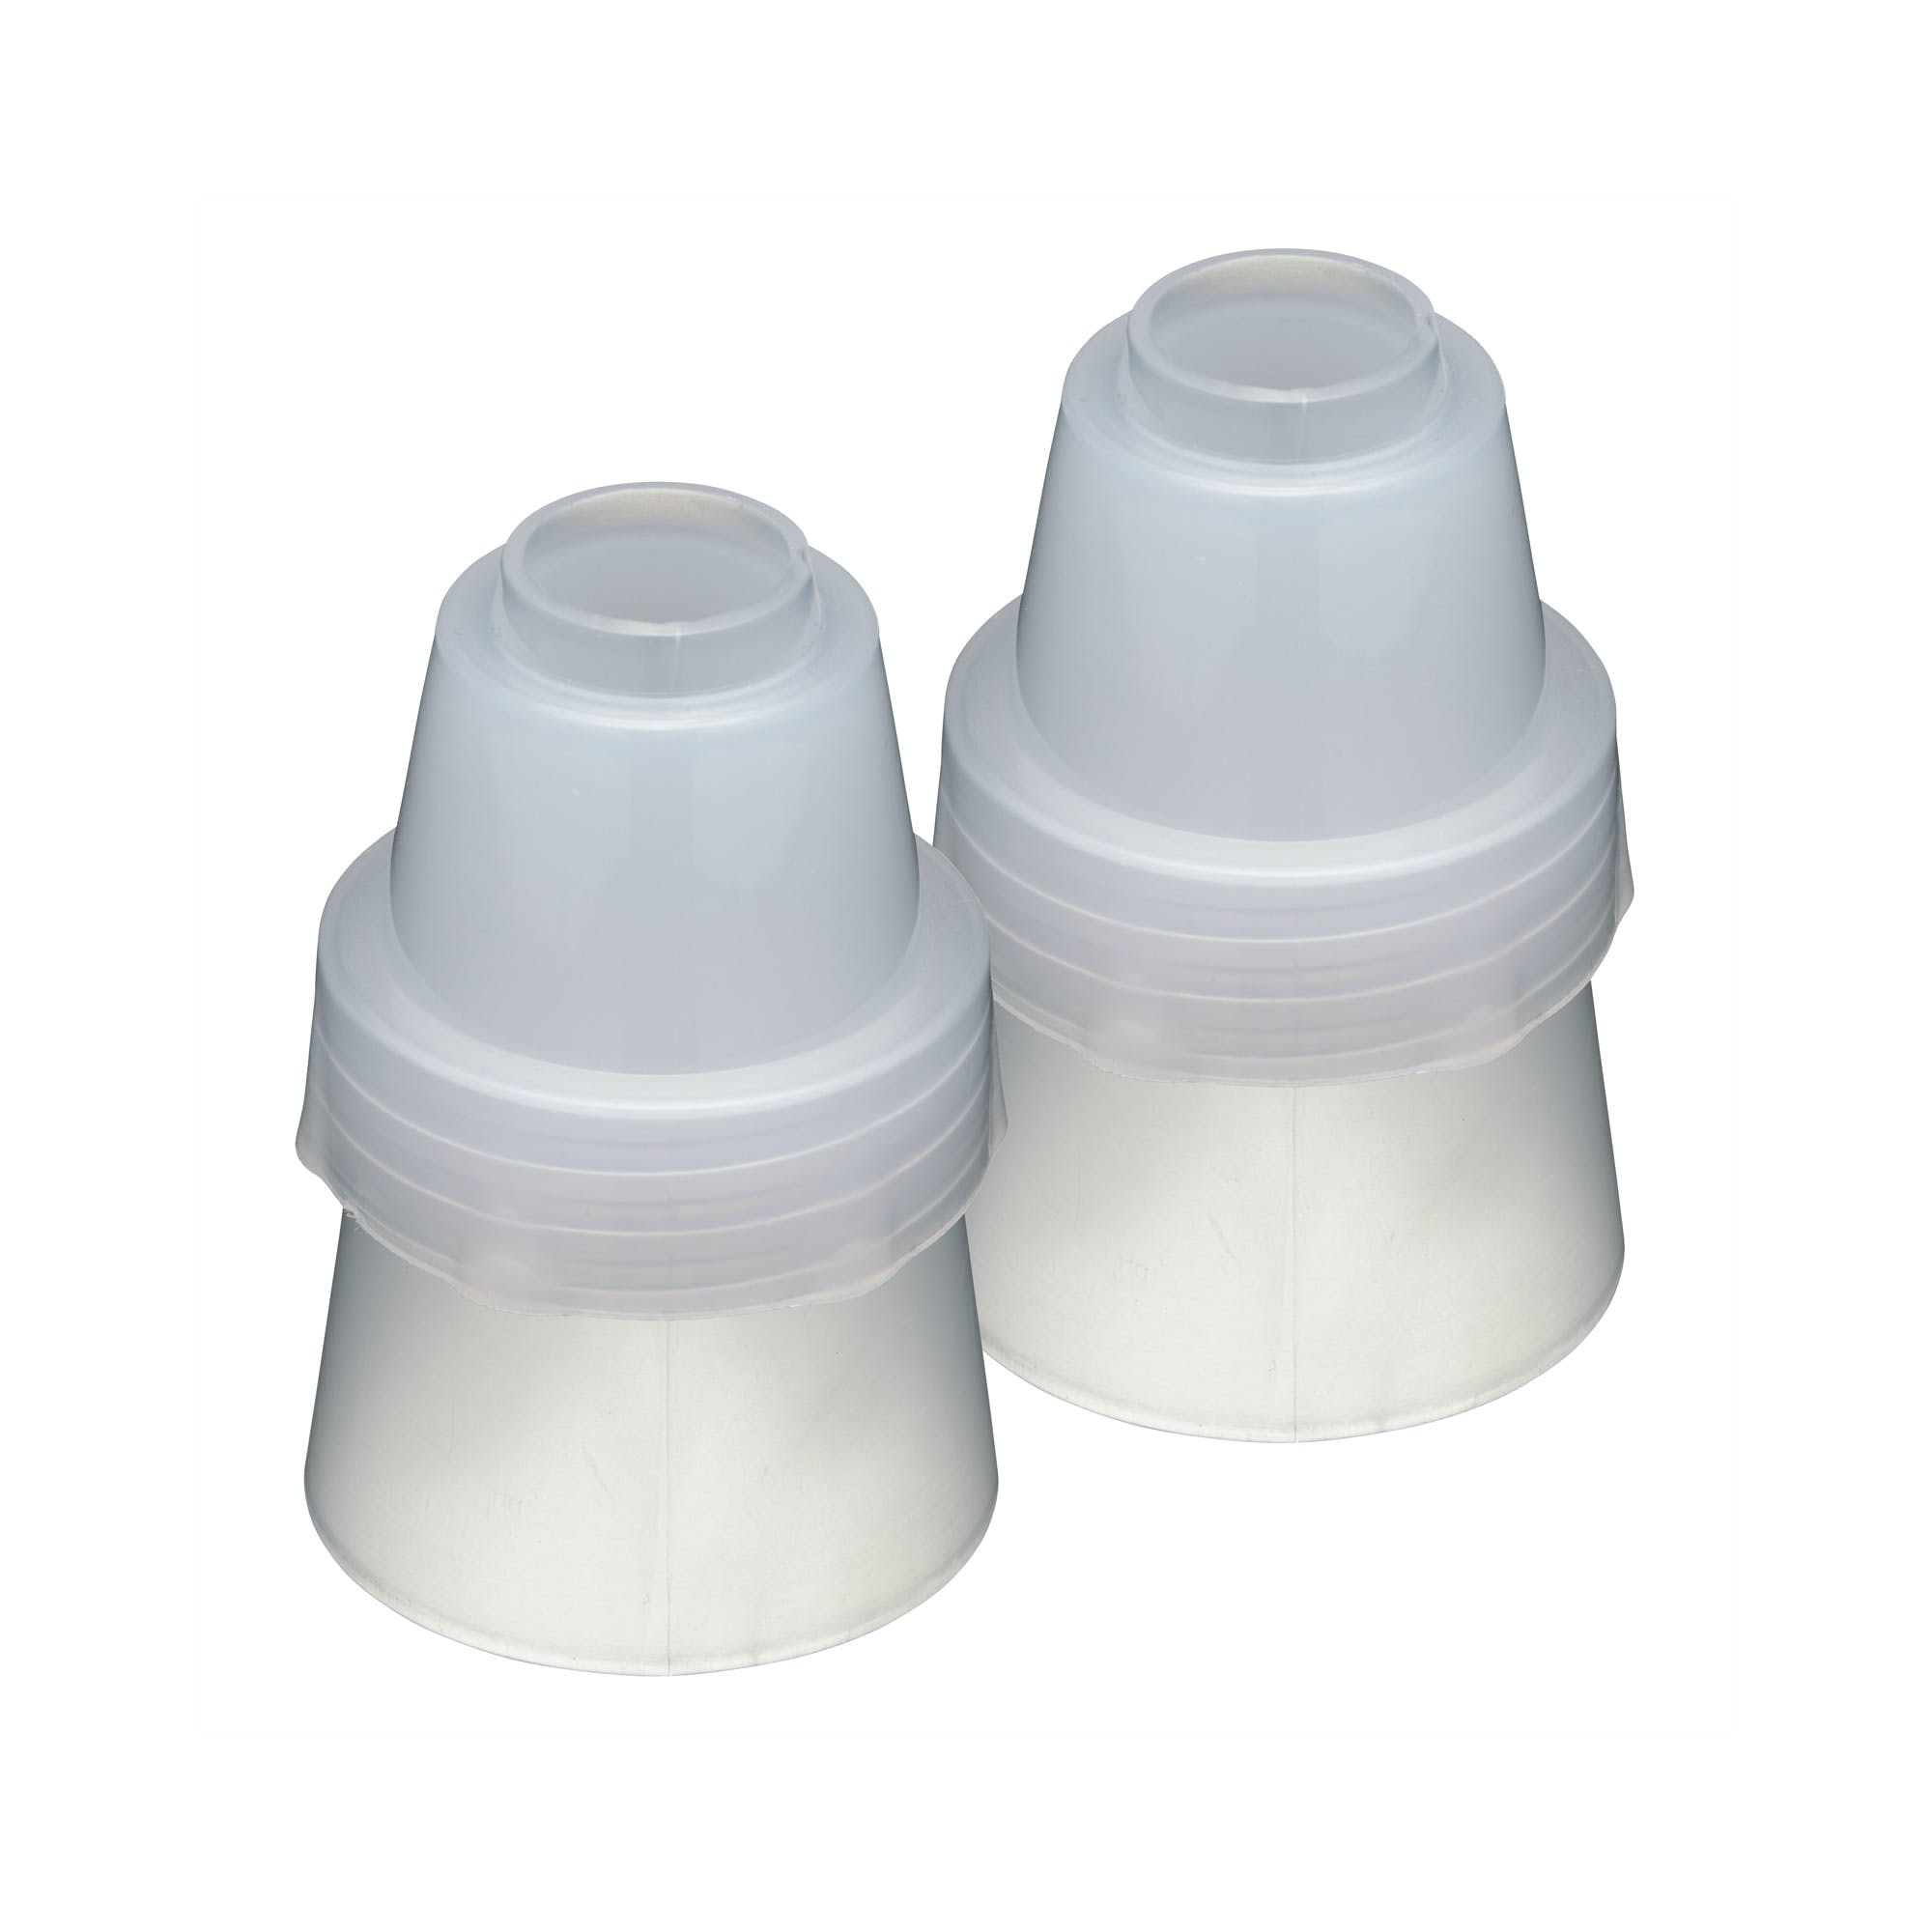 Sweetly Does It Large Plastic Icing Couplers Set of Two - The Cooks Cupboard Ltd